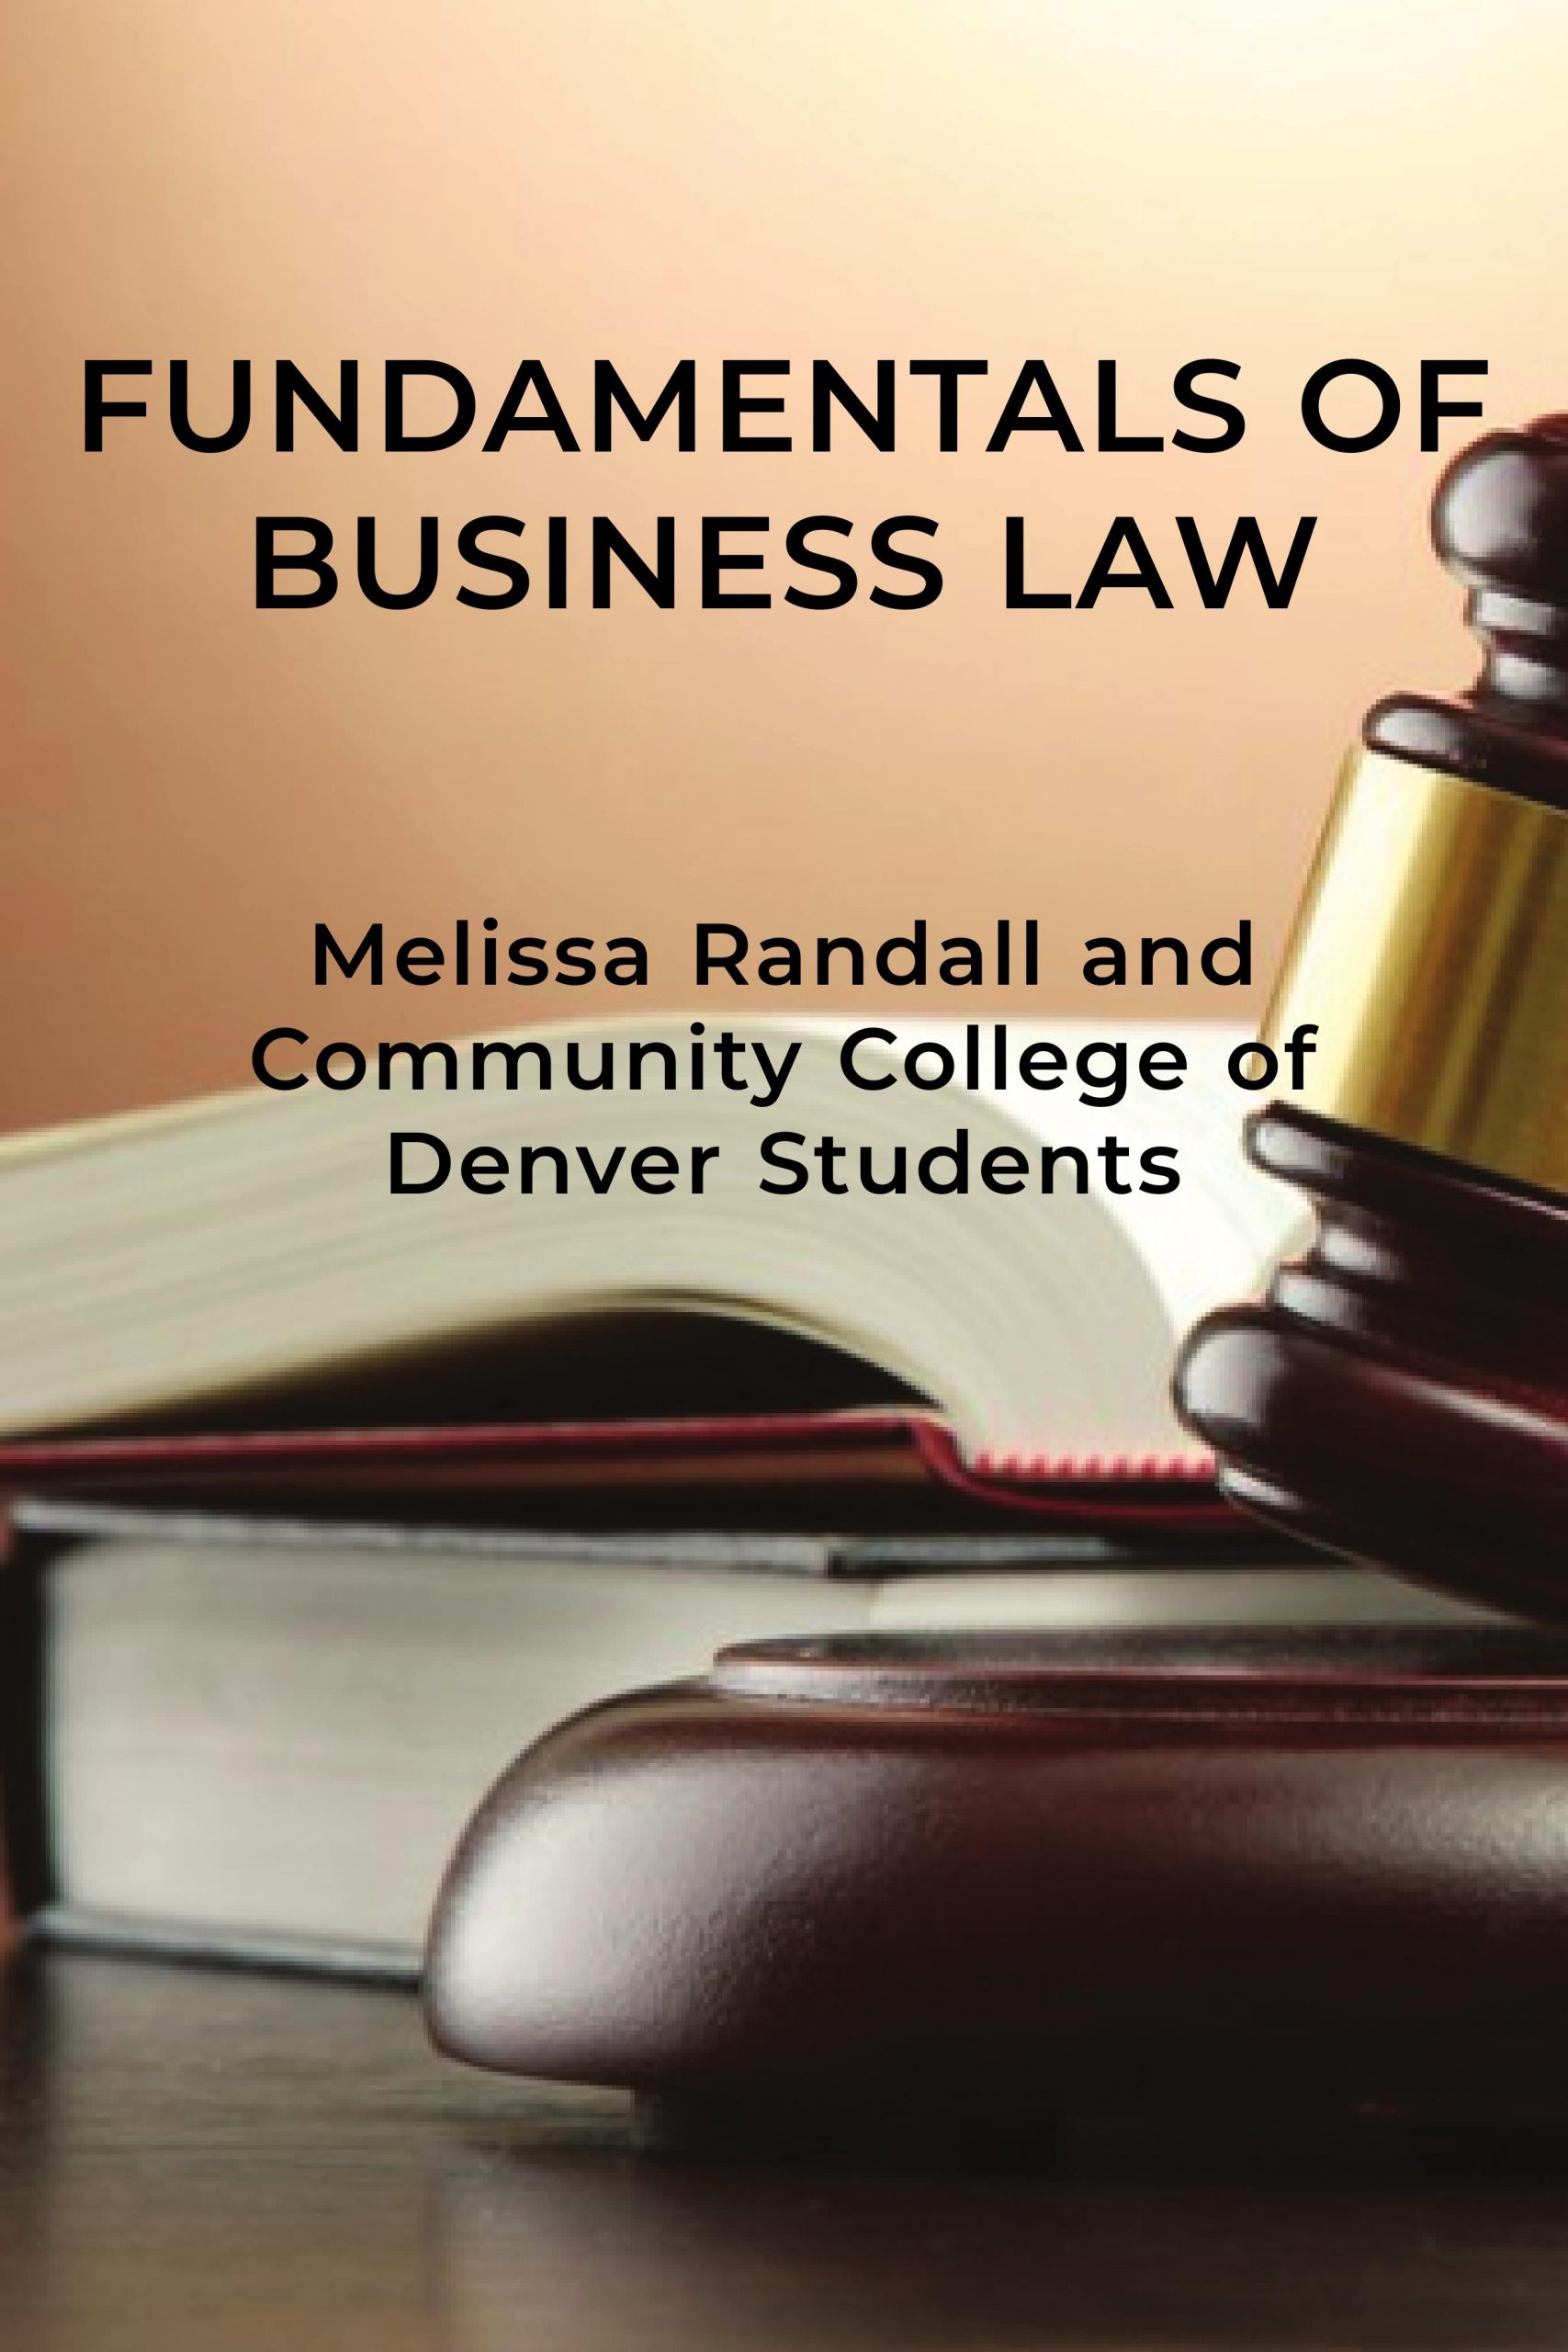 book review of business law